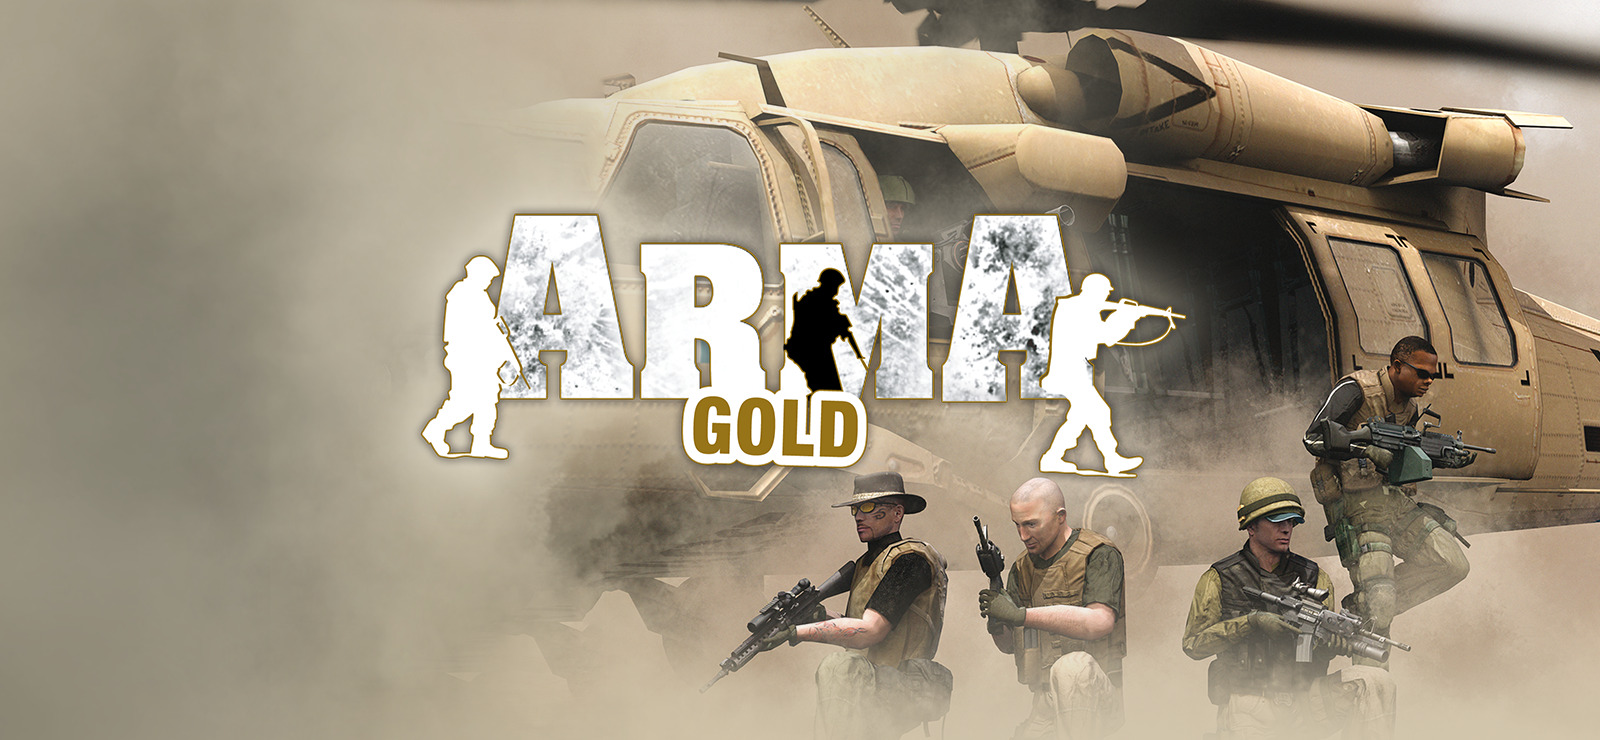 Download Arma 3 for Windows 